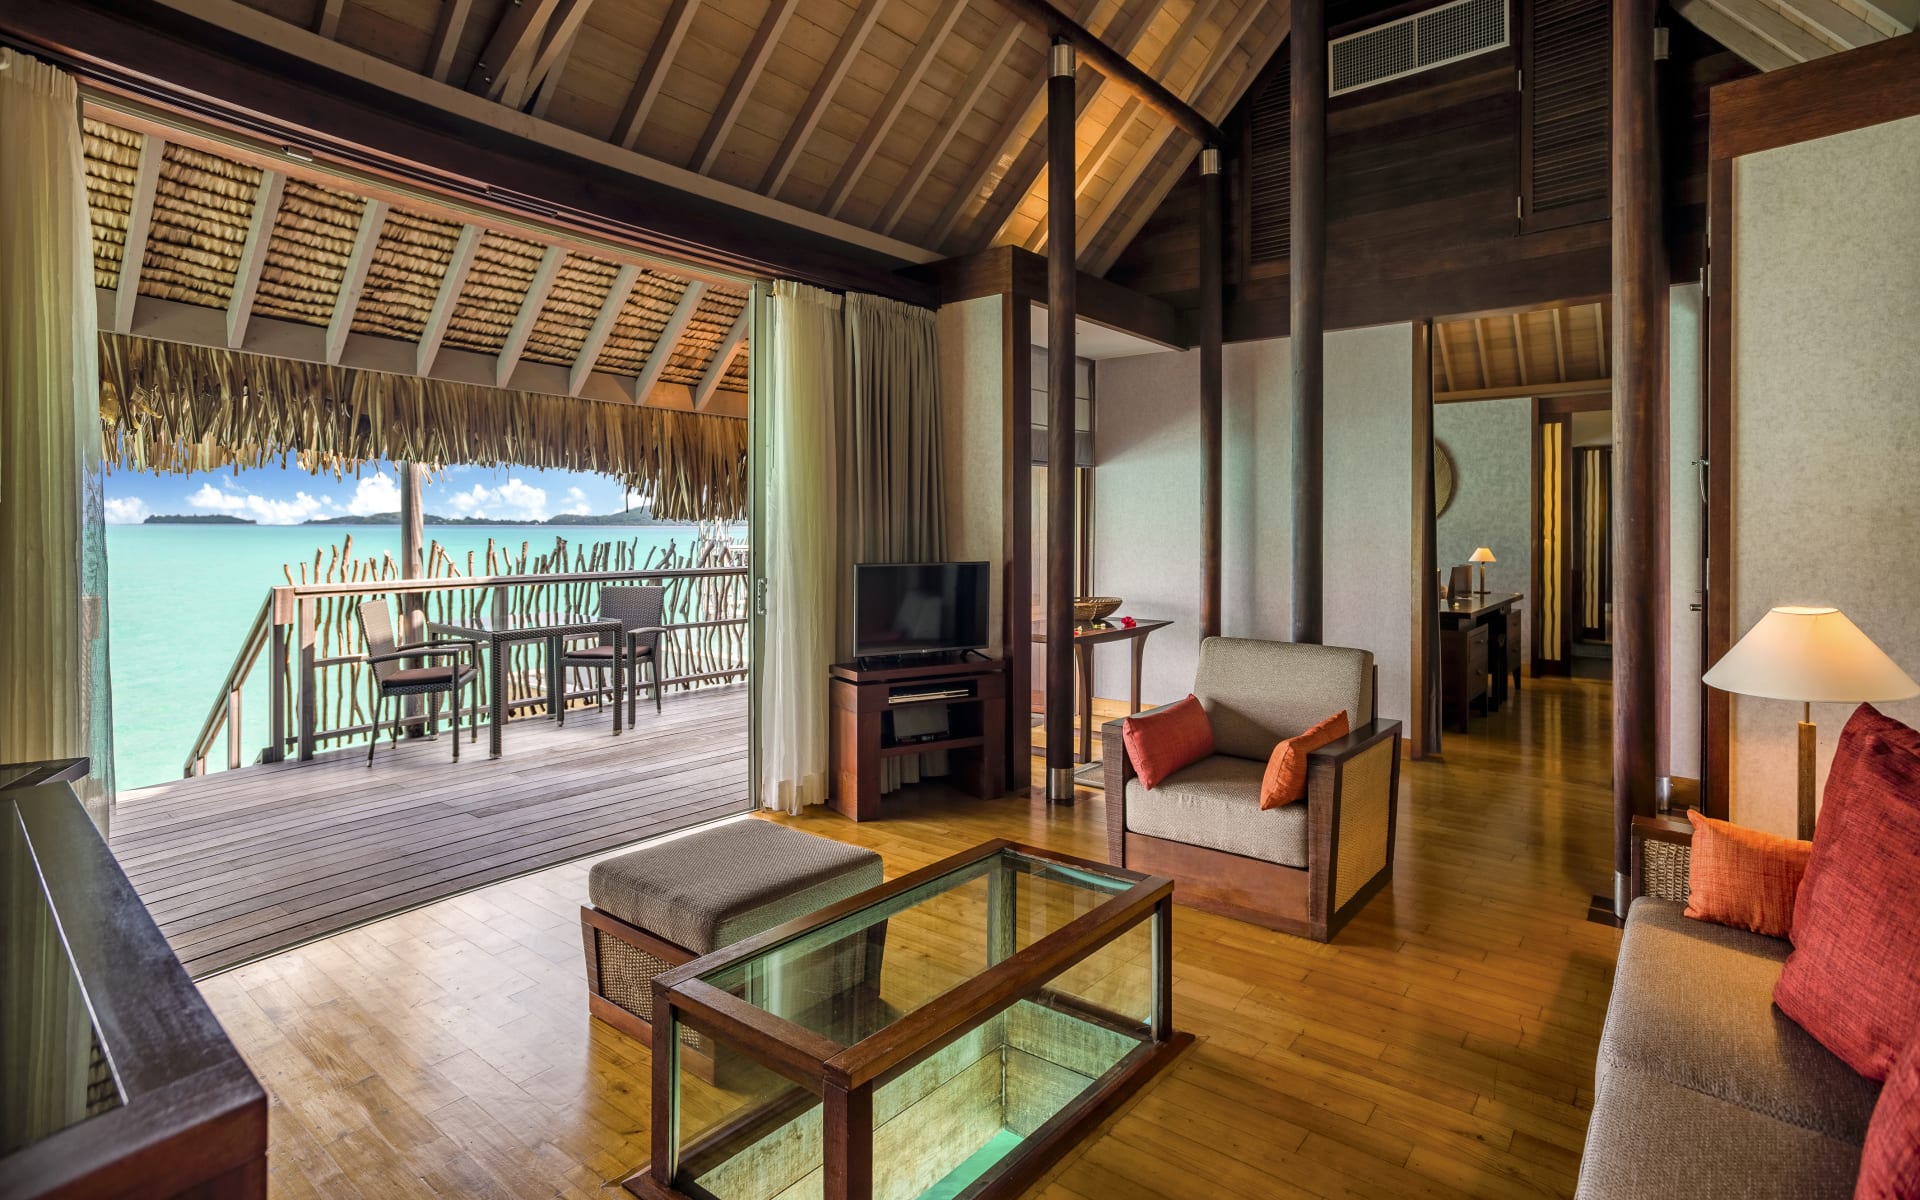 The living room has sofas, a table and a TV with floor-to-ceiling doors leading to the deck and ocean. 